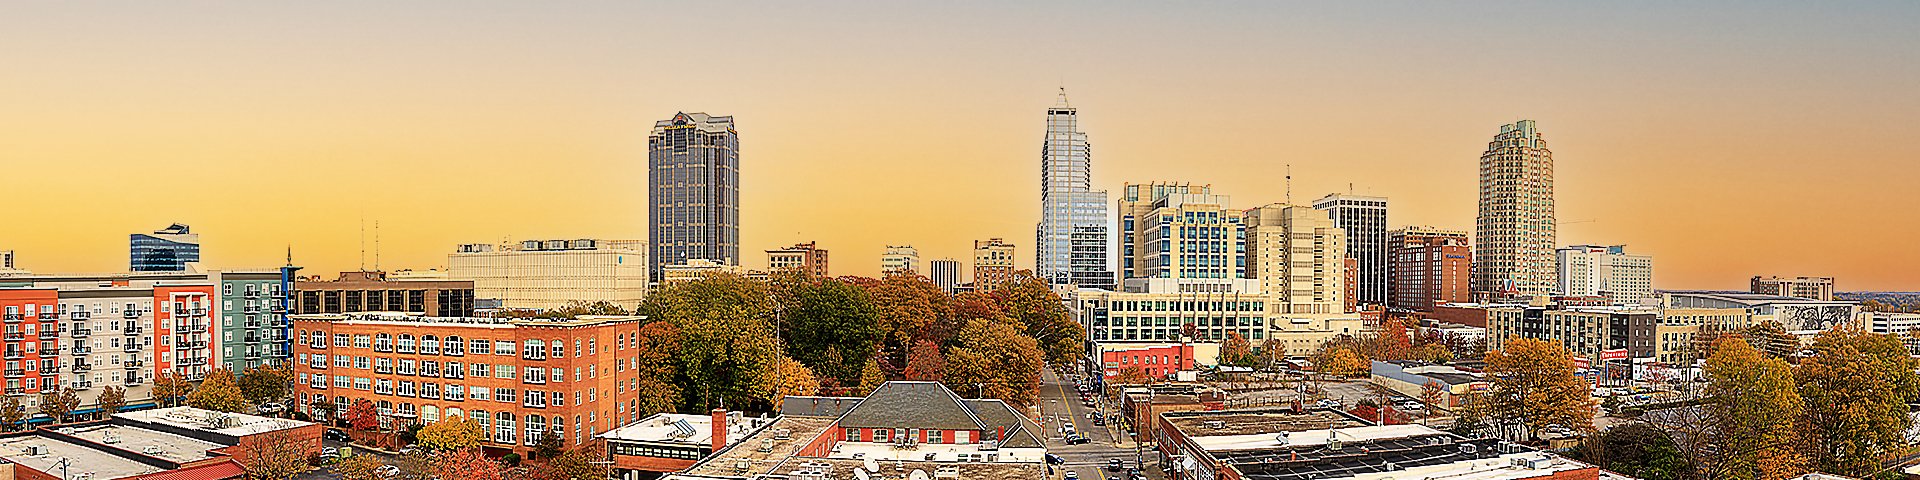 Raleigh NC Cityscape